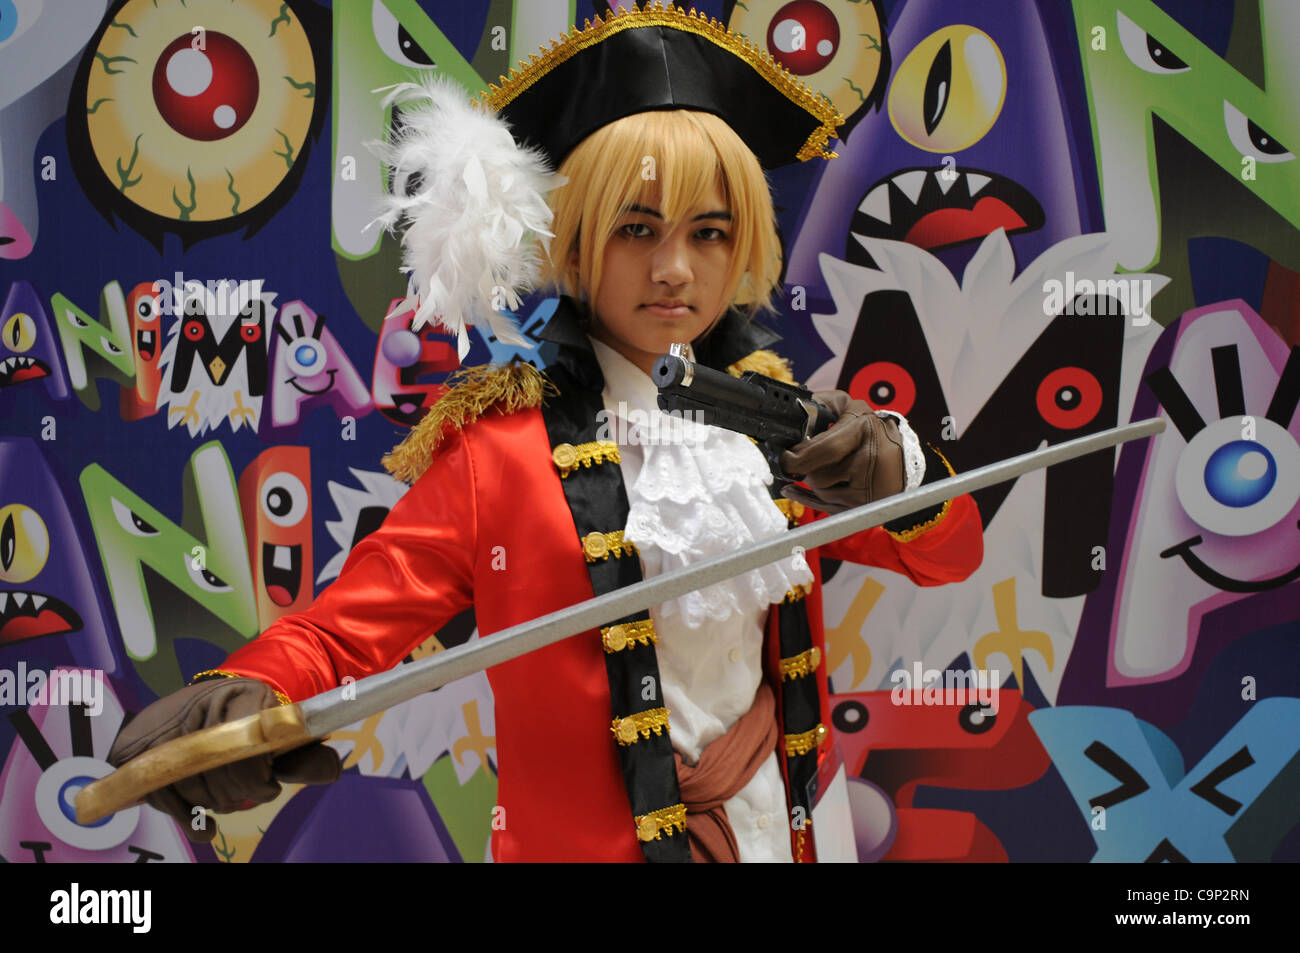 Feb. 4, 2012 - Jakarta, Indonesia - A 'HelloFest8' participant  wearing Britanian Pirate costume during the annual pop culture festival in Jakarta, Indonesia. February 4, 2012. The festival was started by an Indonesian film animation and design school and has become a big hit in the world's most pop Stock Photo